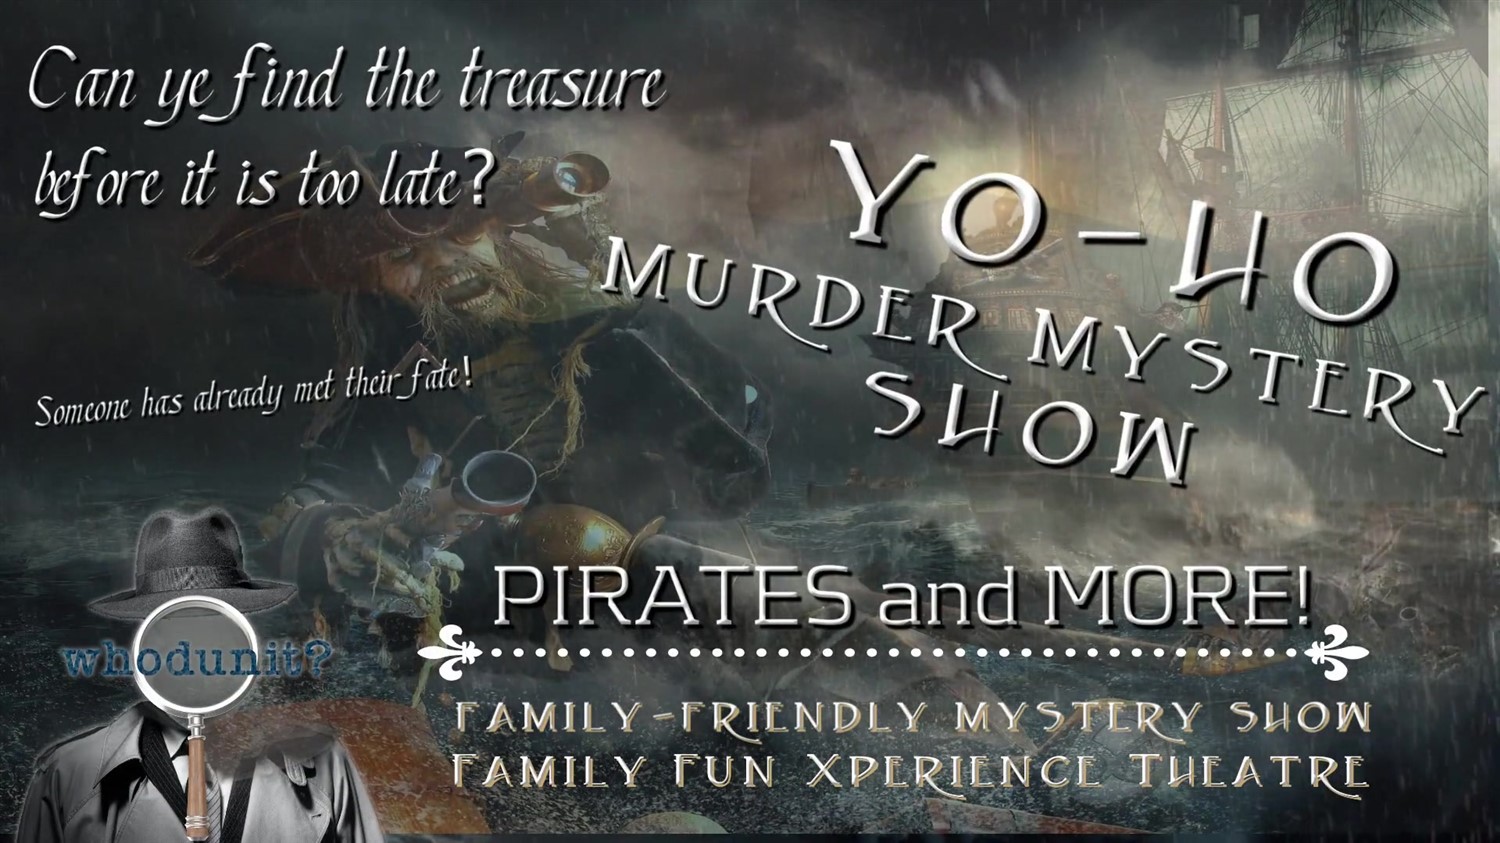 Whodunit? YO HO PIRATE ISLAND Murder Mystery + Game Show on Jun 29, 19:00@FFX Theatre - Pick a seat, Buy tickets and Get information on Family Fun Xperience tickets.ffxshow.org